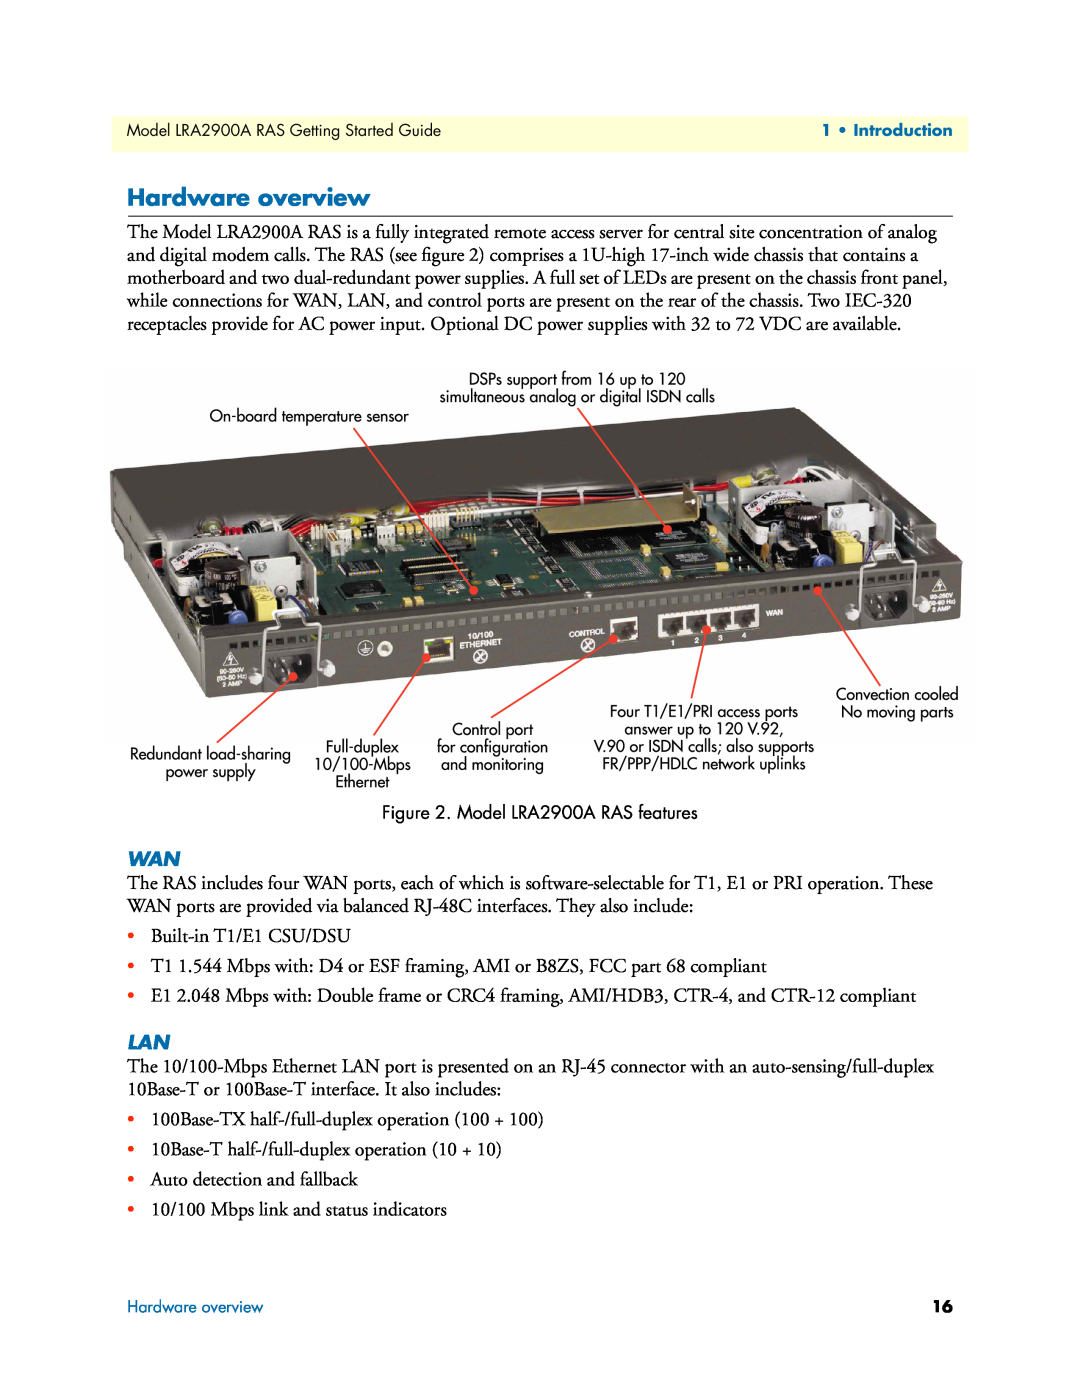 Black Box LRA2900A manual Hardware overview 